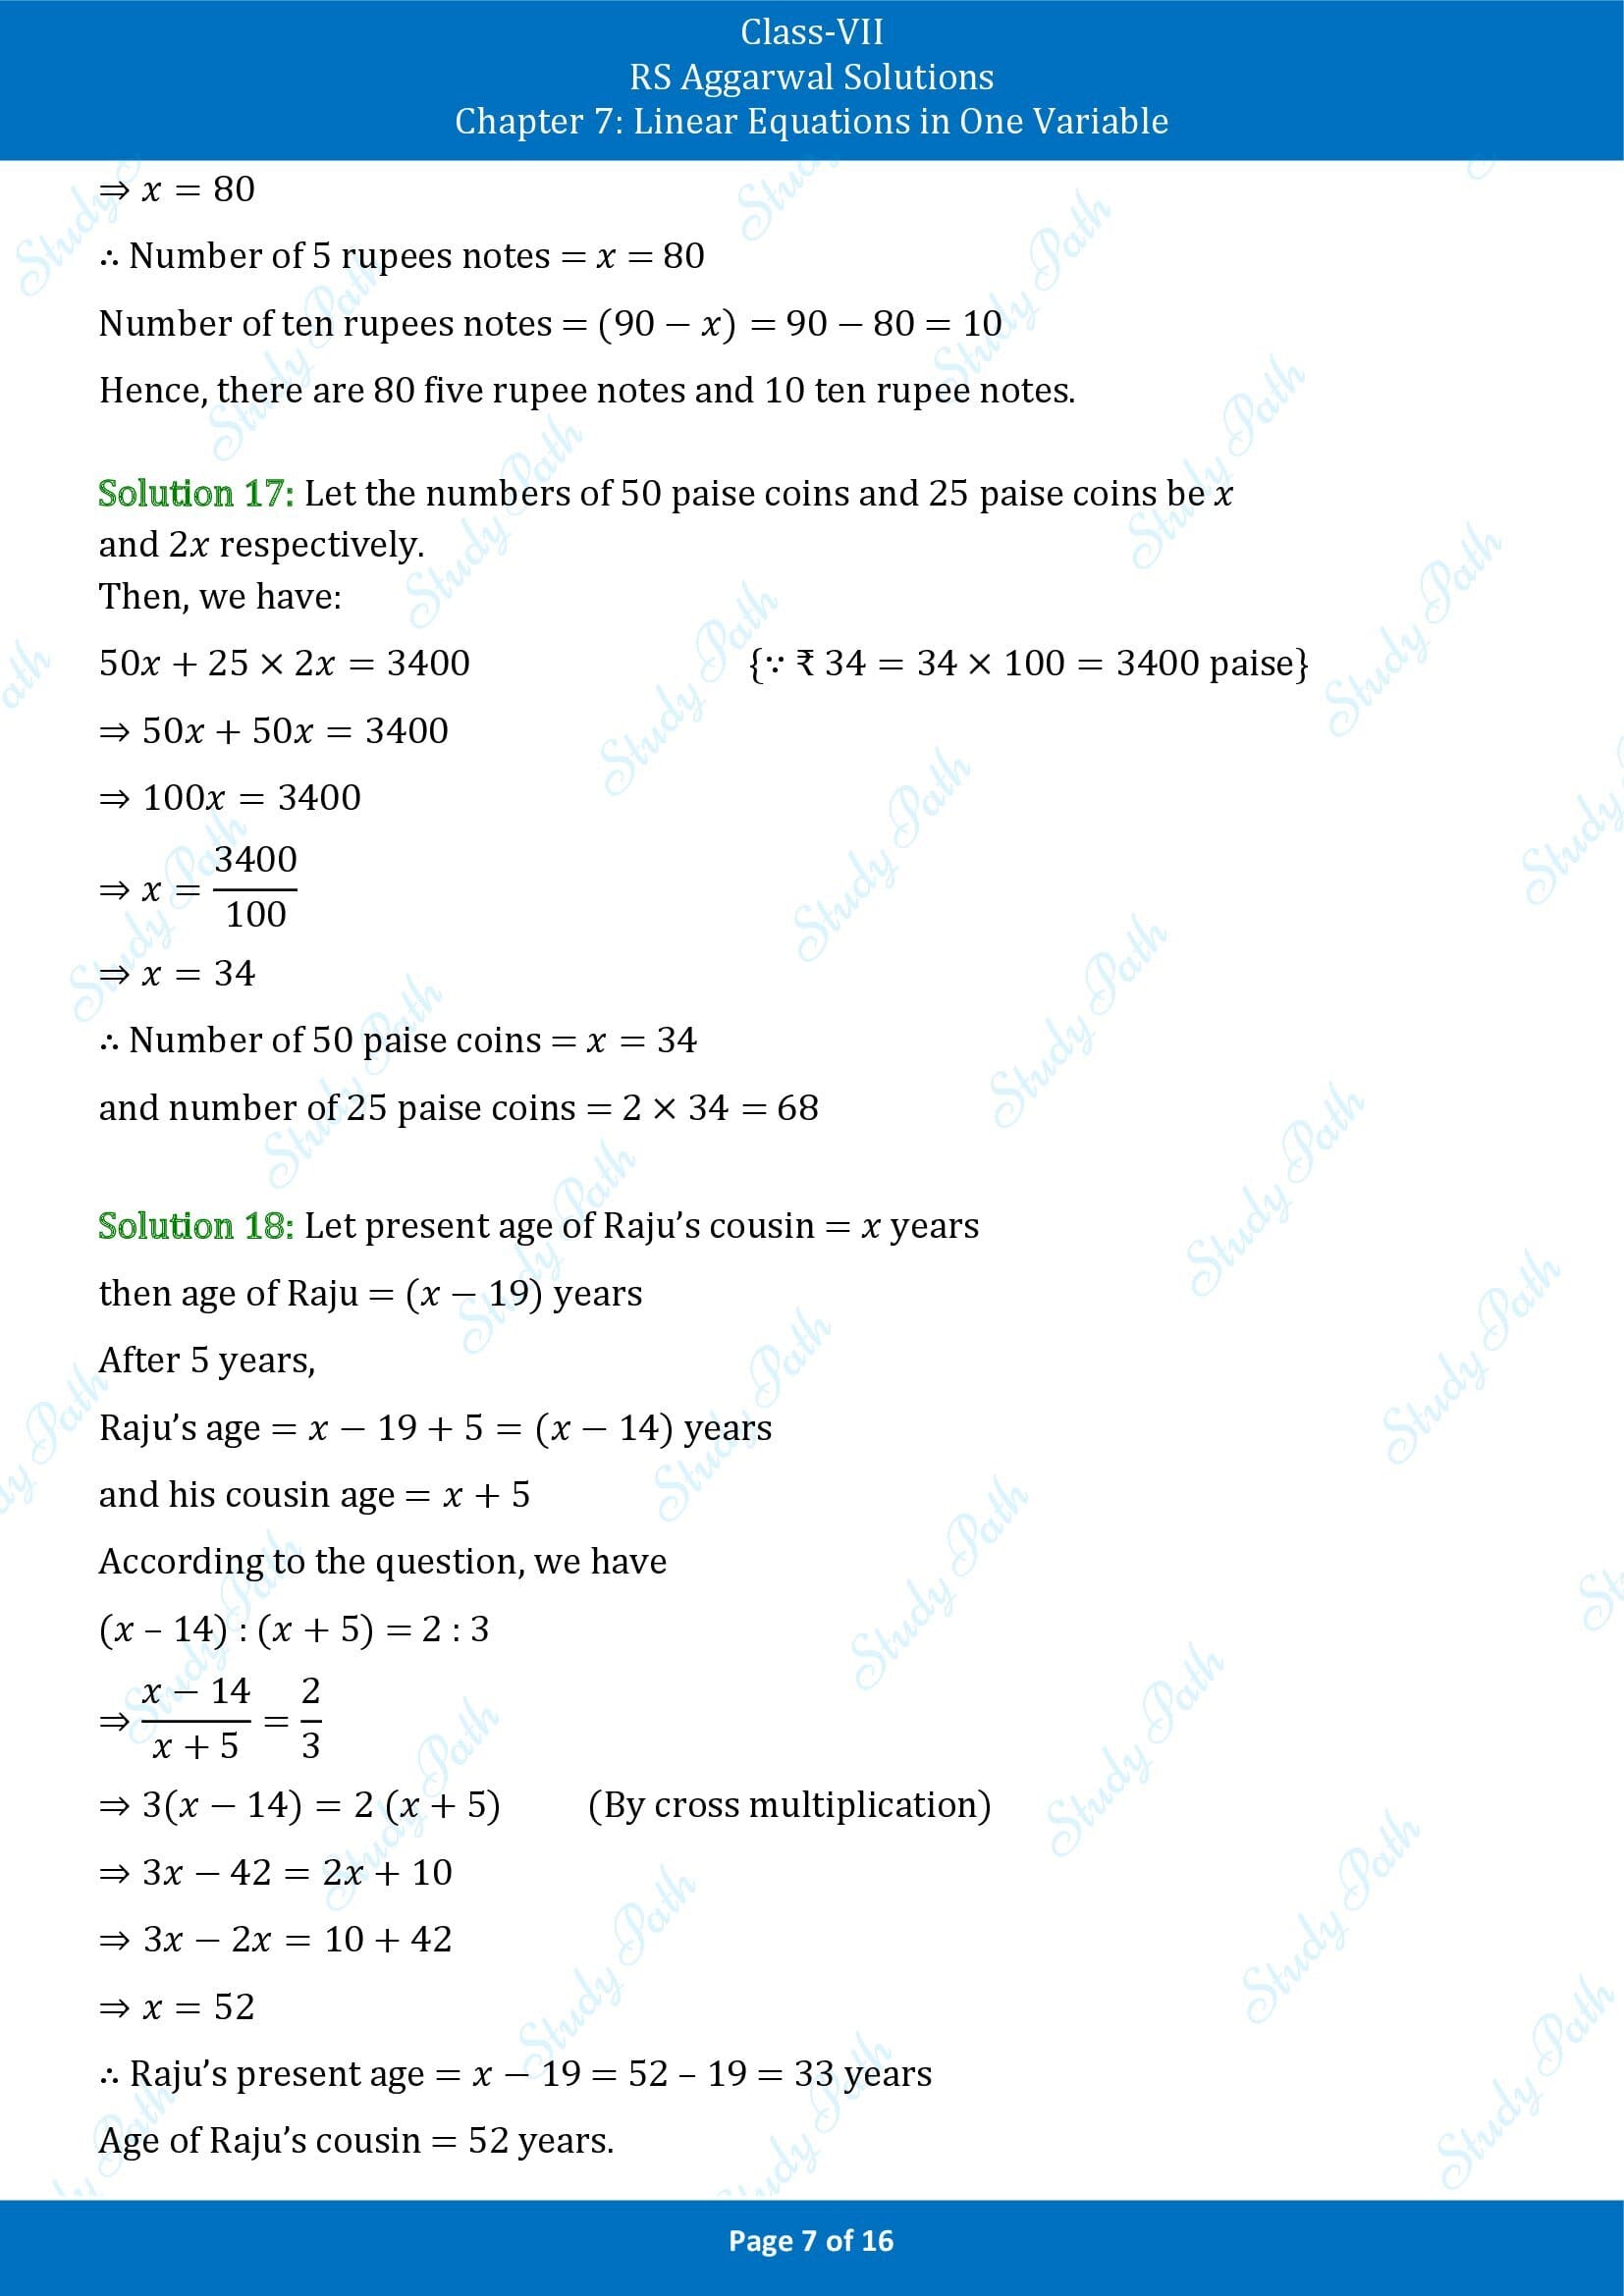 RS Aggarwal Solutions Class 7 Chapter 7 Linear Equations in One Variable Exercise 7B 00007